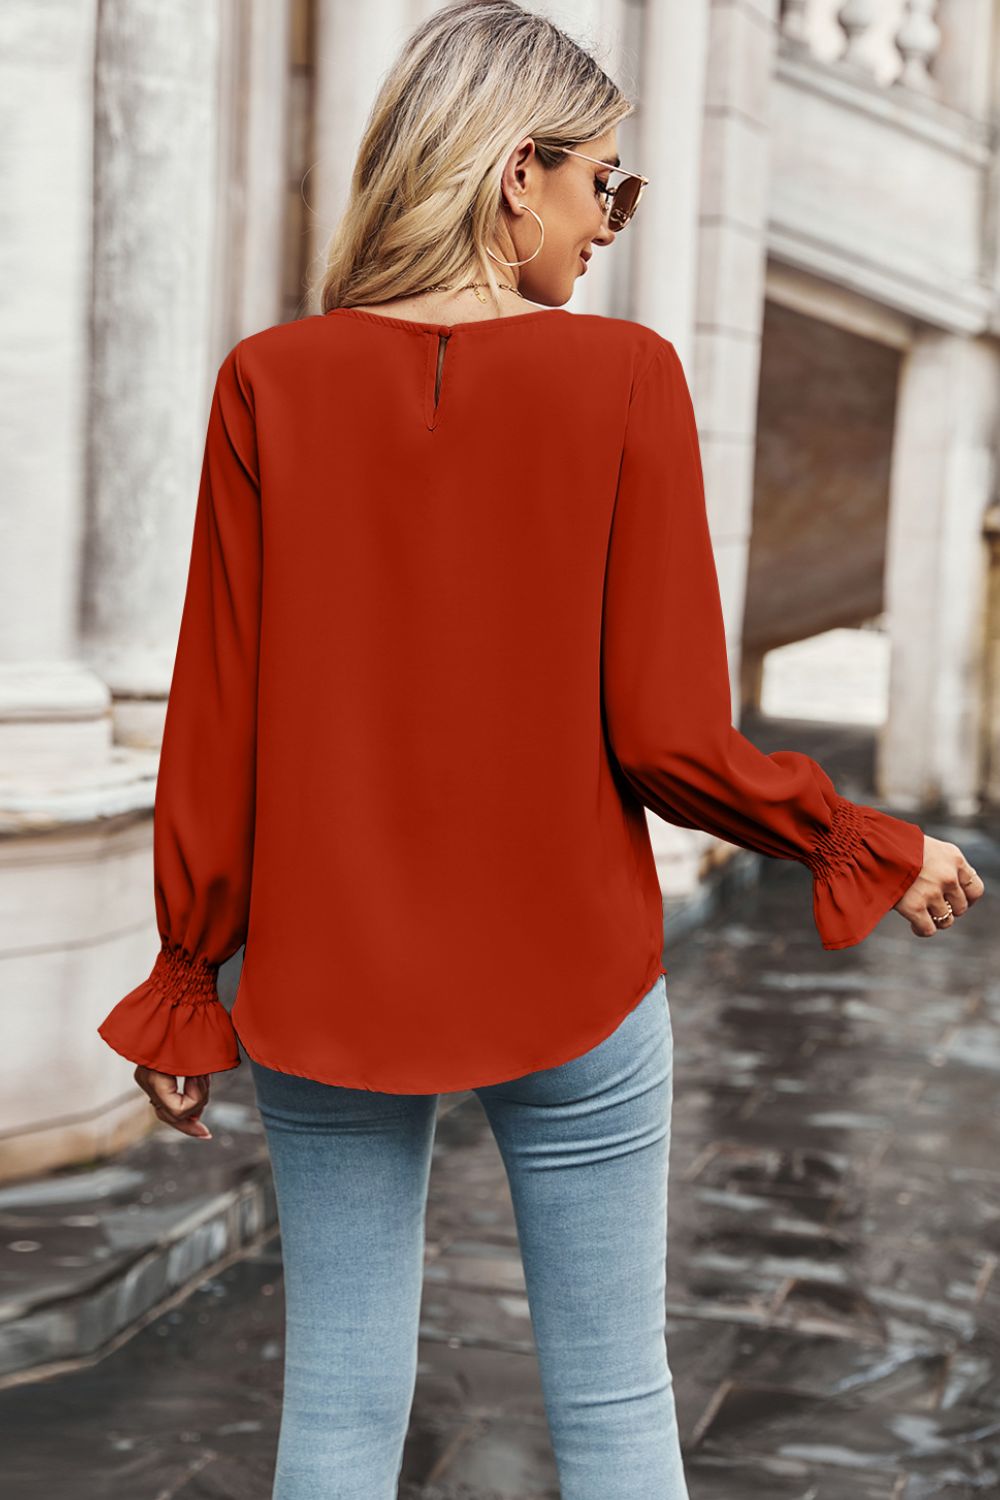 Women's Red-Orange Colored Round Neck Long Flounce Sleeve Blouse with Smocked Wrists, Rounded Hem Line in Front and Back